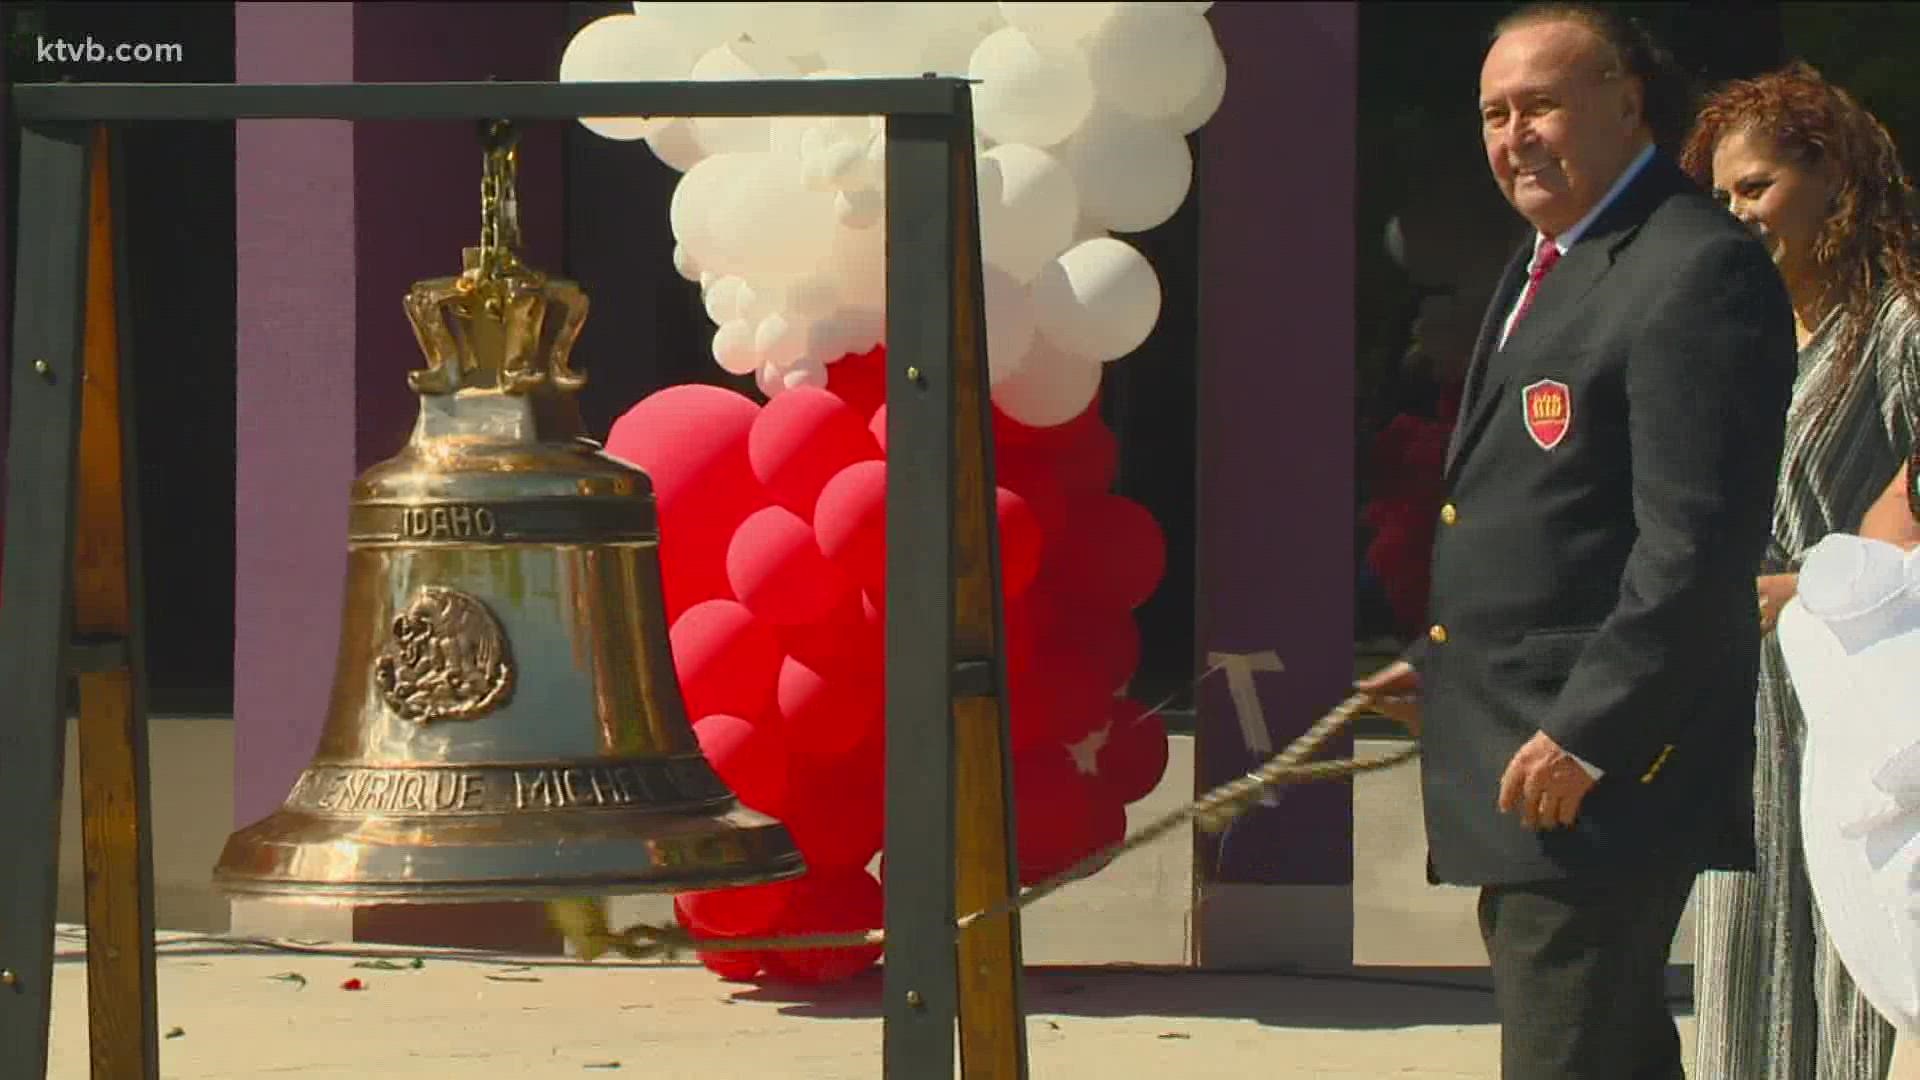 The new replica of the Mexican Independence Bell honors the Mexican community in the state of Idaho.